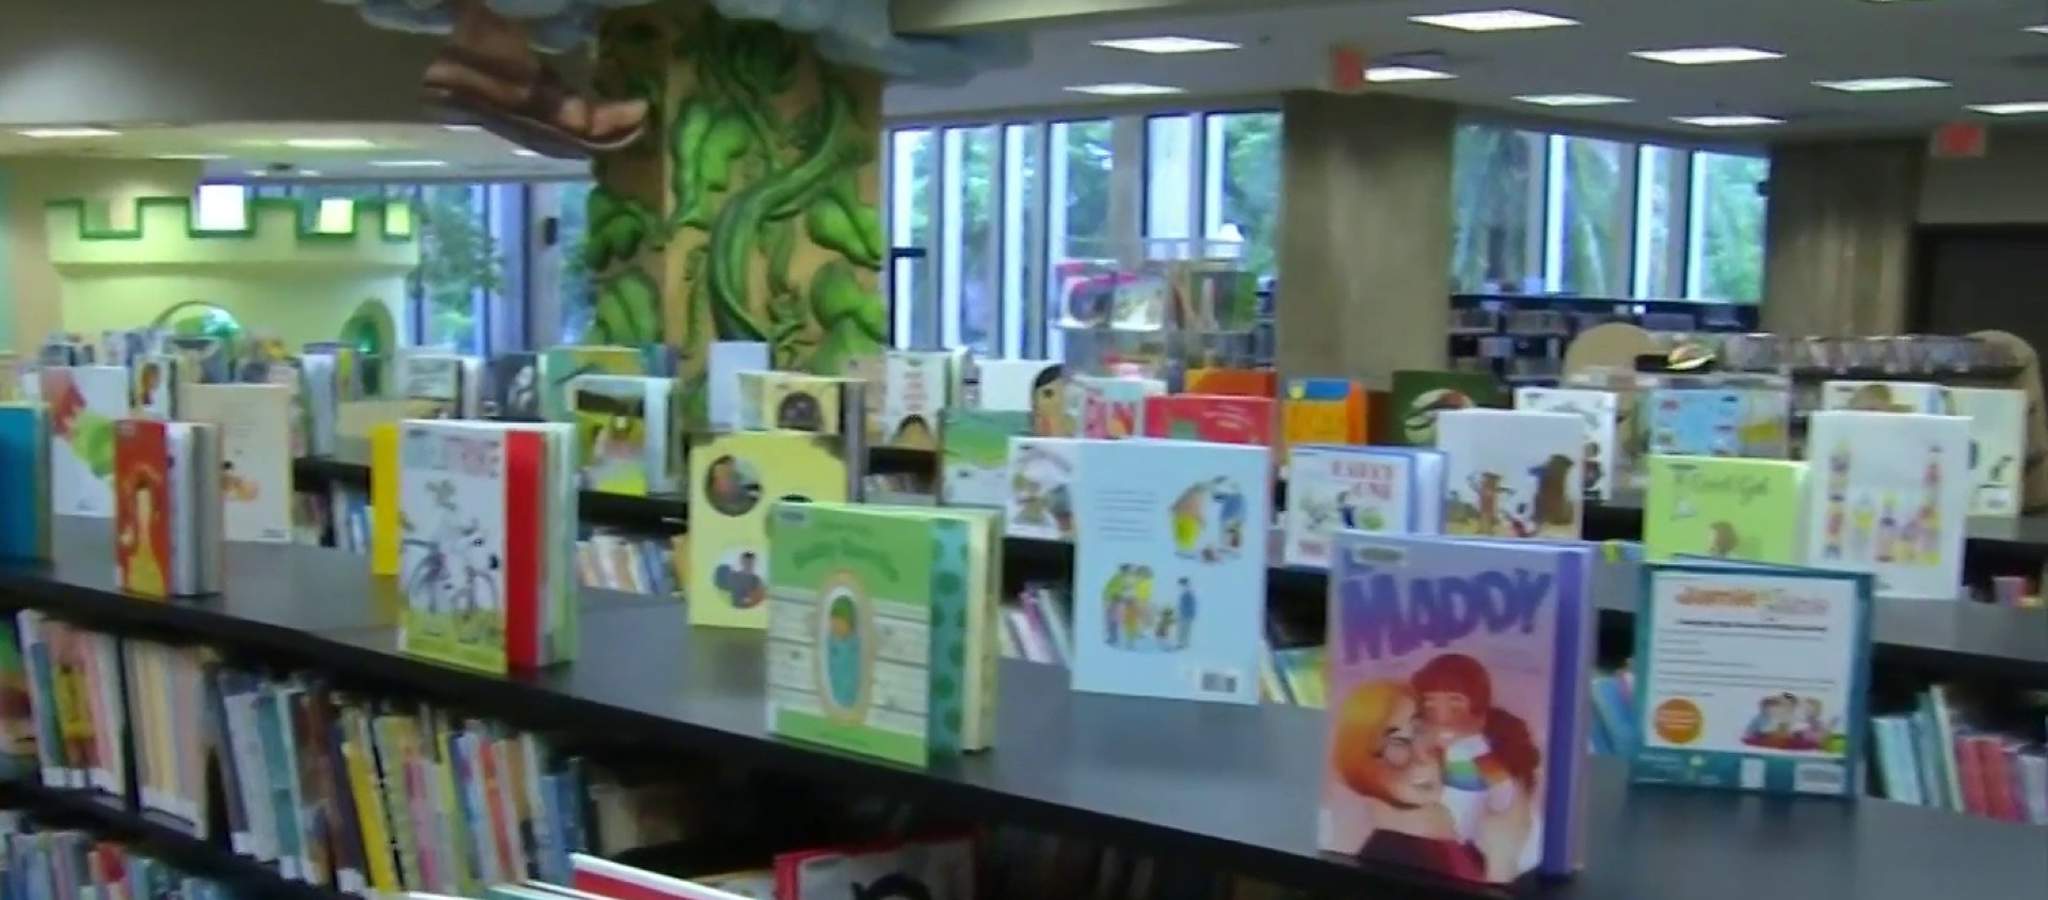 6 things you can get with a free Orange County library card